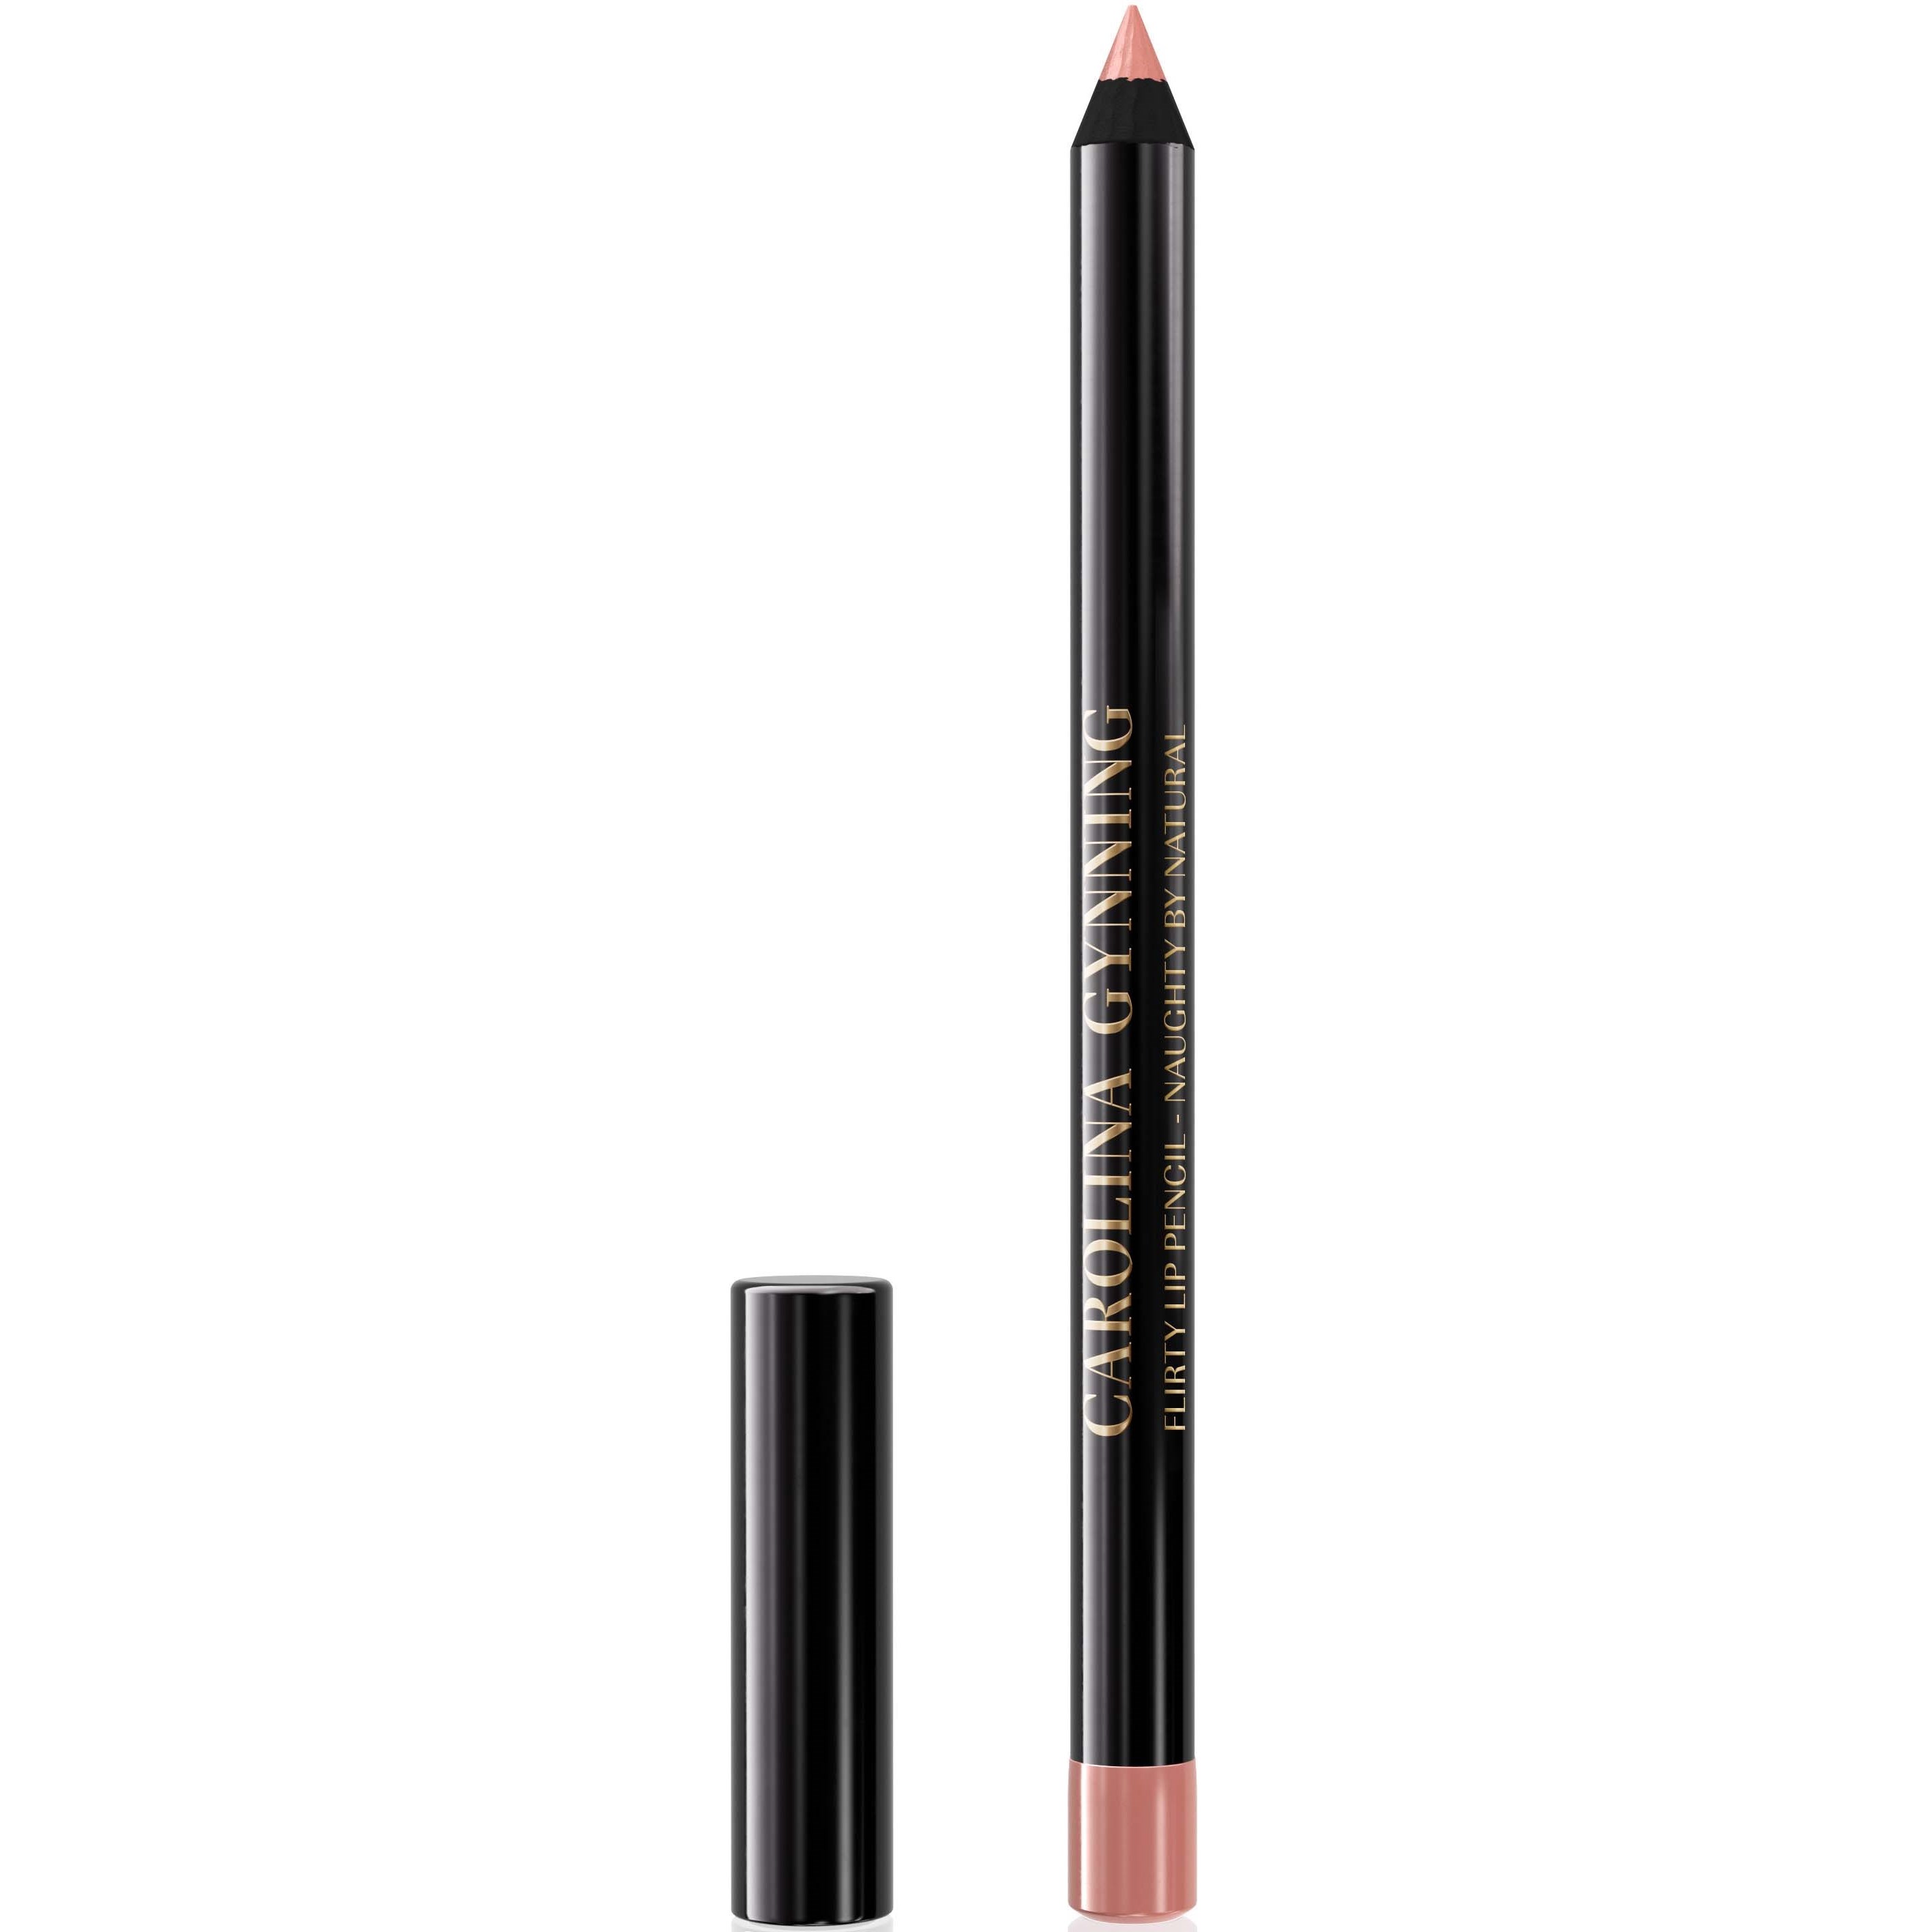 Gynning Beauty Flirty Lip Pencil Naughty by Natural